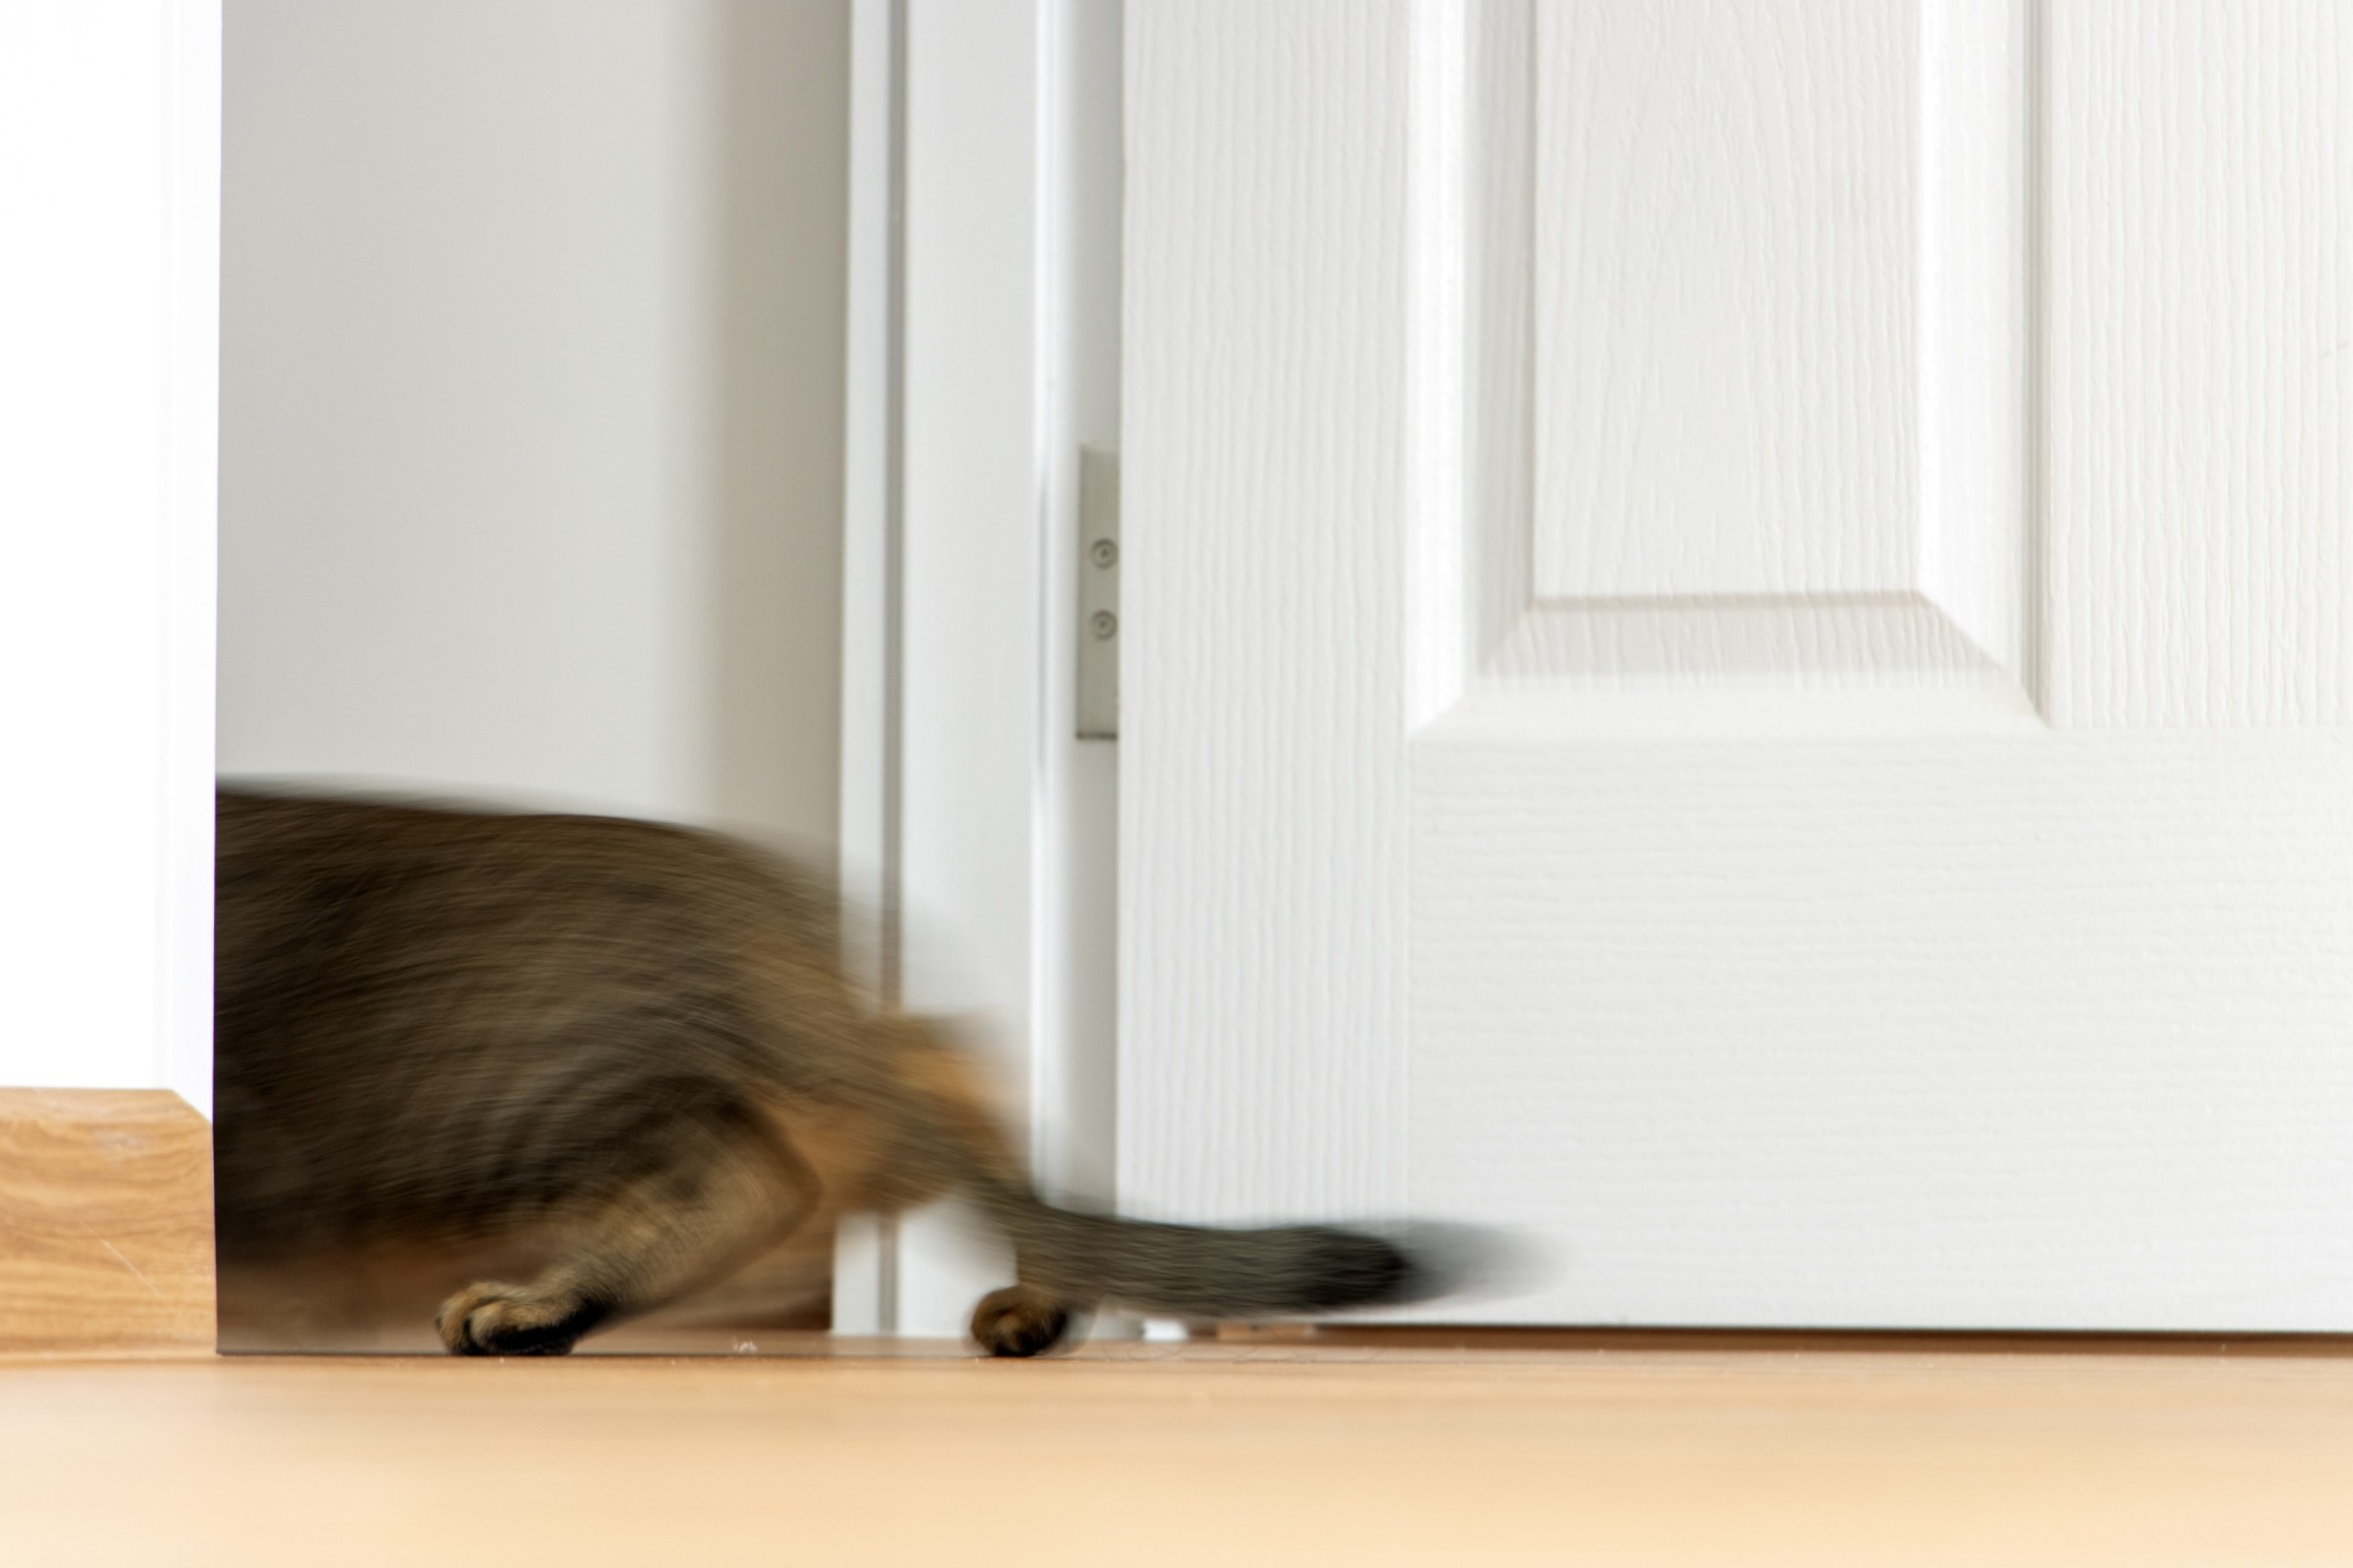 A cat escaping from a room